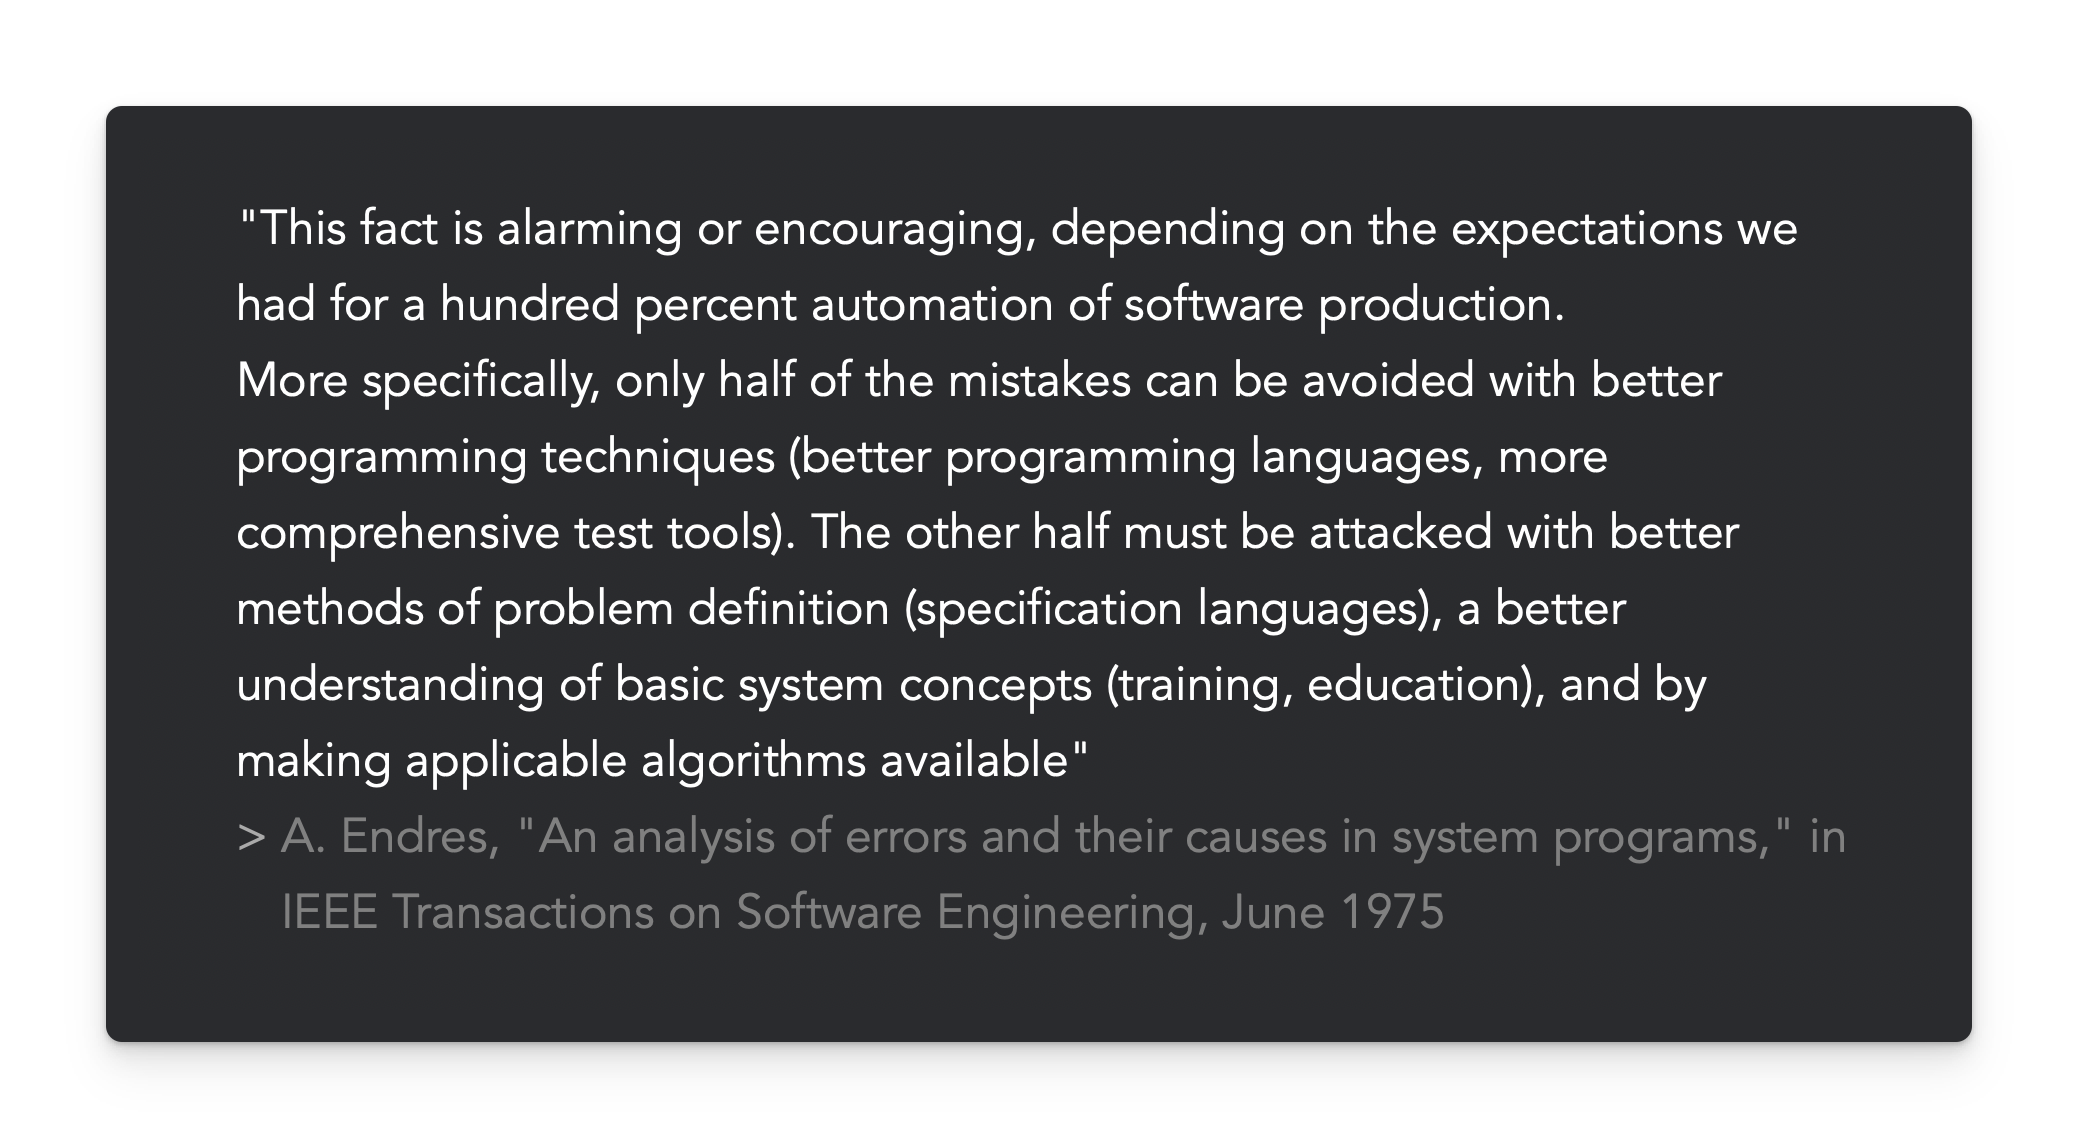 "This fact is alarming or encouraging, depending on the expectations we had for a hundred percent automation of software production.  More specifically, only half of the mistakes can be avoided with better programming techniques (better programming languages, more comprehensive test tools). The other half must be attacked with better methods of problem definition (specification languages), a better understanding of basic system concepts (training, education), and by making applicable algorithms available"